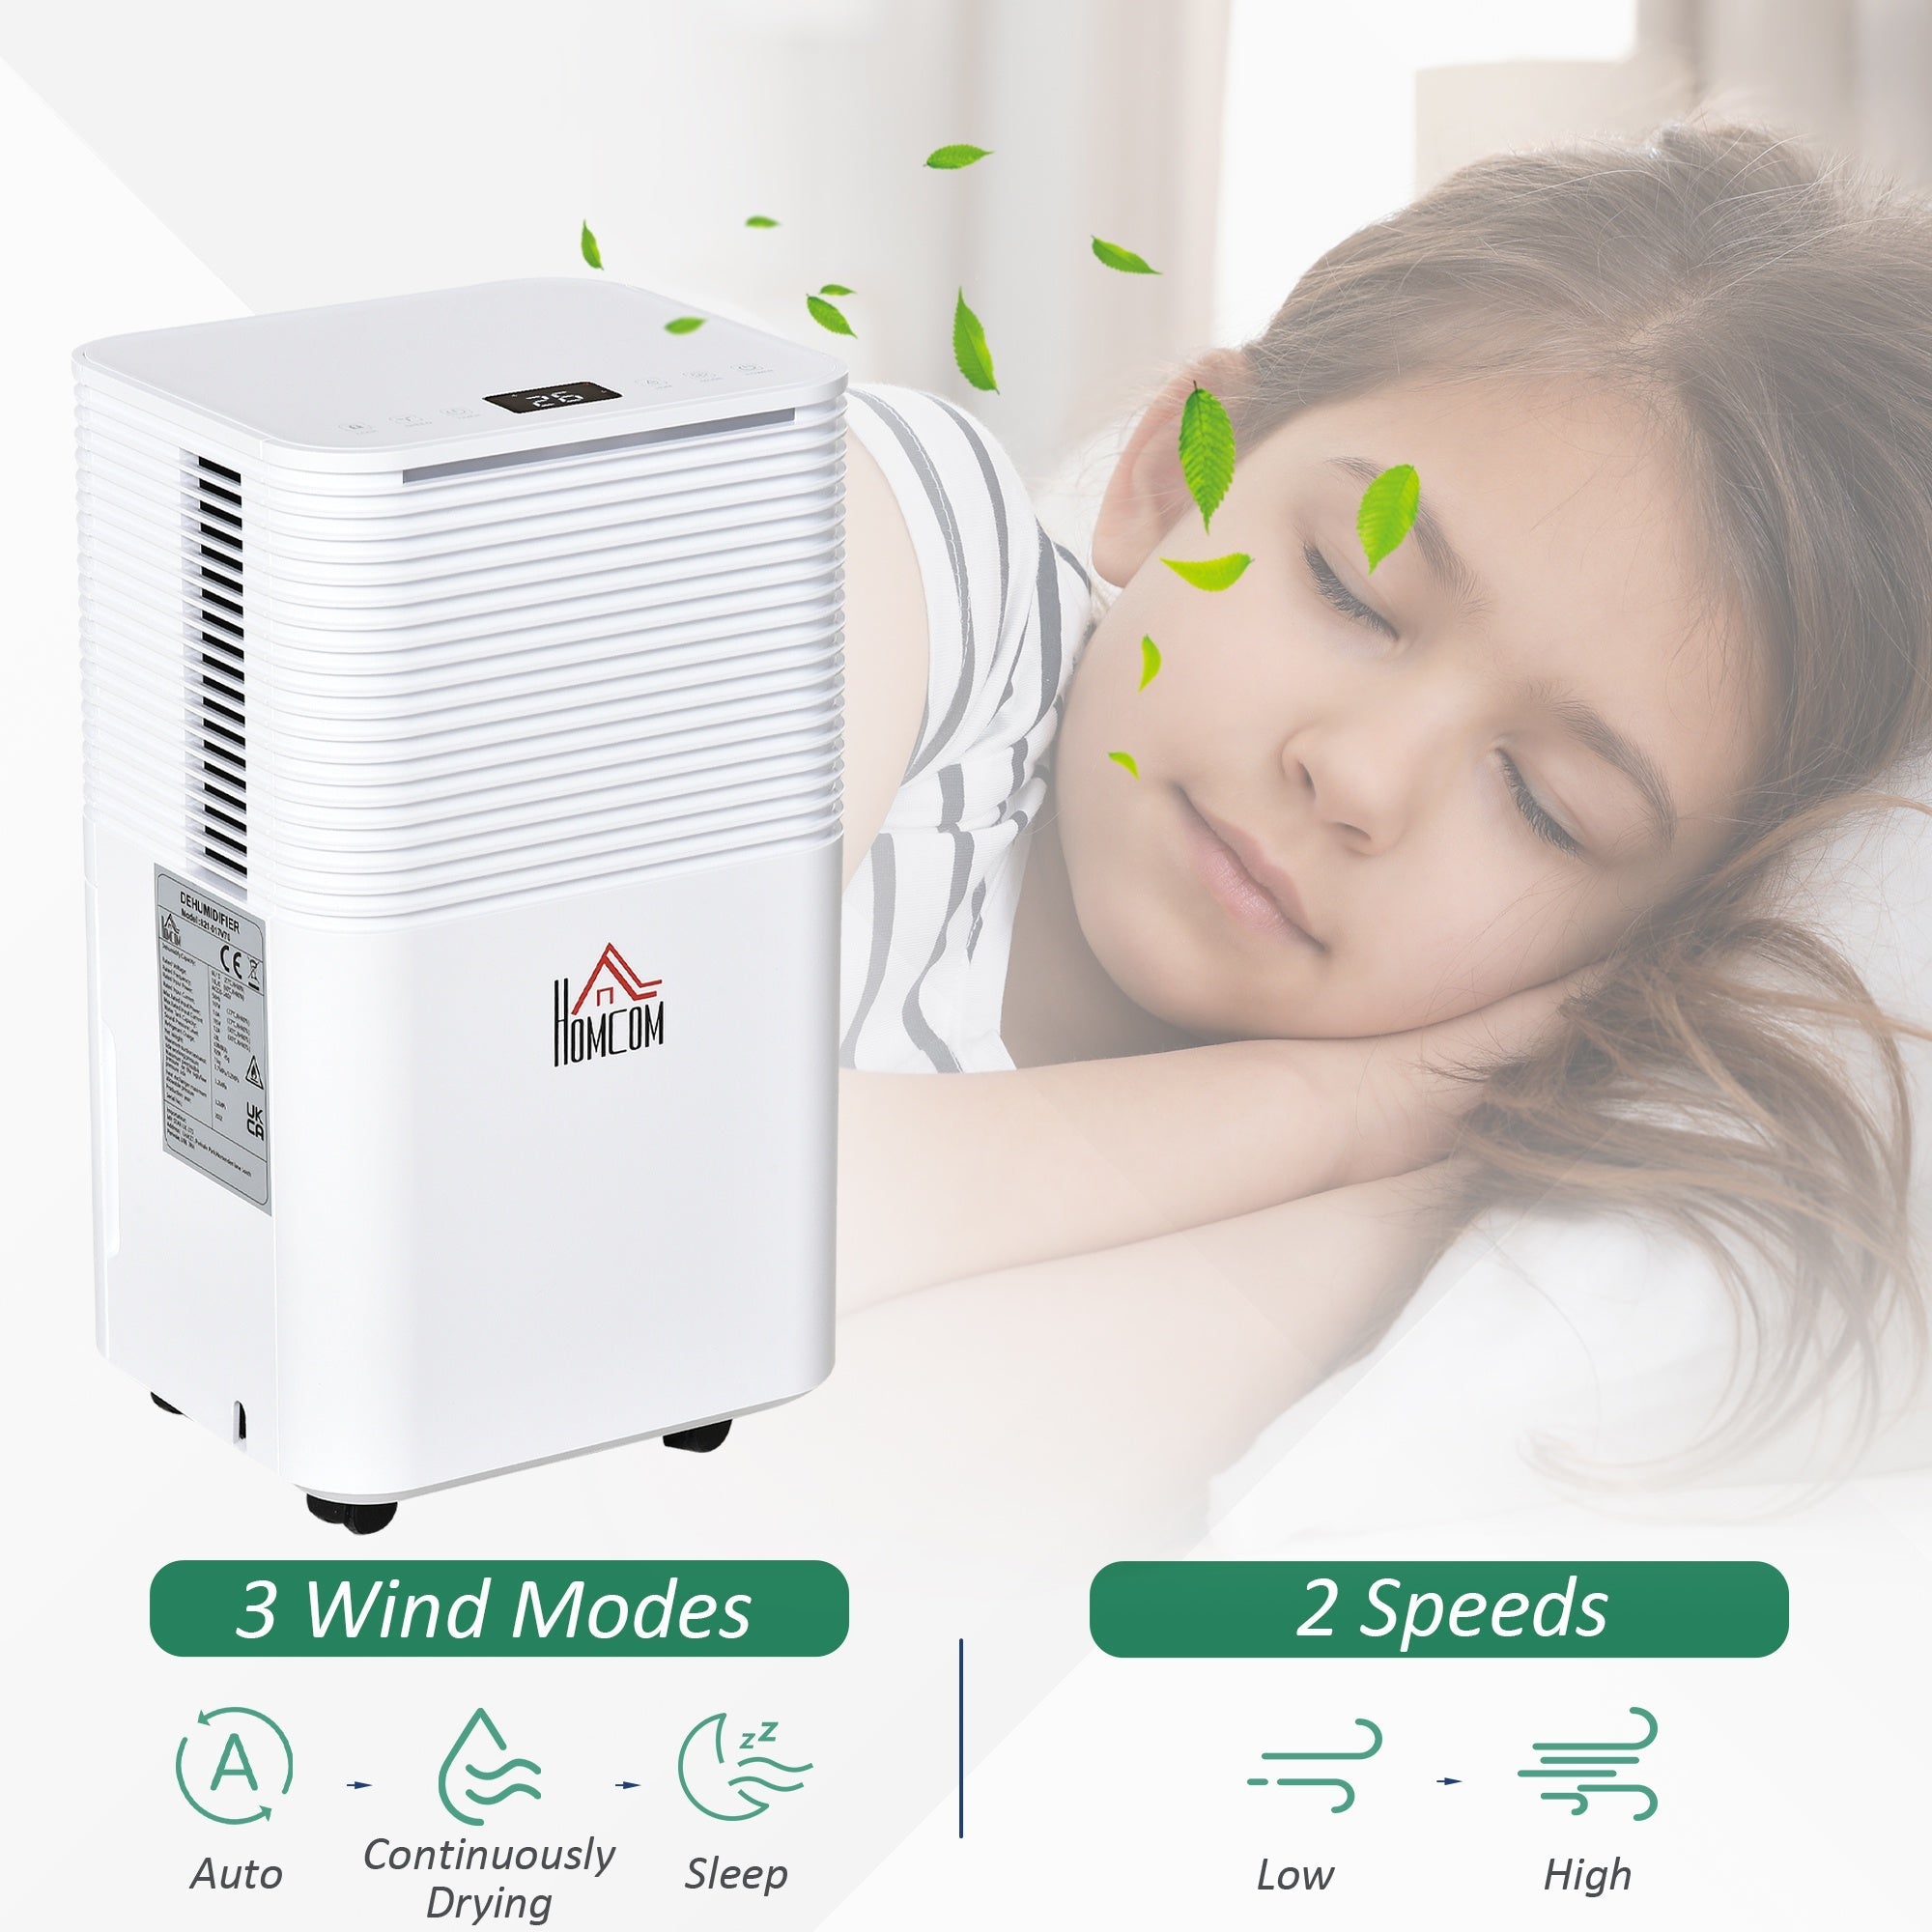  HOMCOM 40 Evaporative Air Cooler for Home Office, 3-In-1 Ice  Cooling Fan with Humidifier, Oscillating, 3 Modes, 3 Speeds, 8H Timer,  Remote, LED Display, White : Home & Kitchen